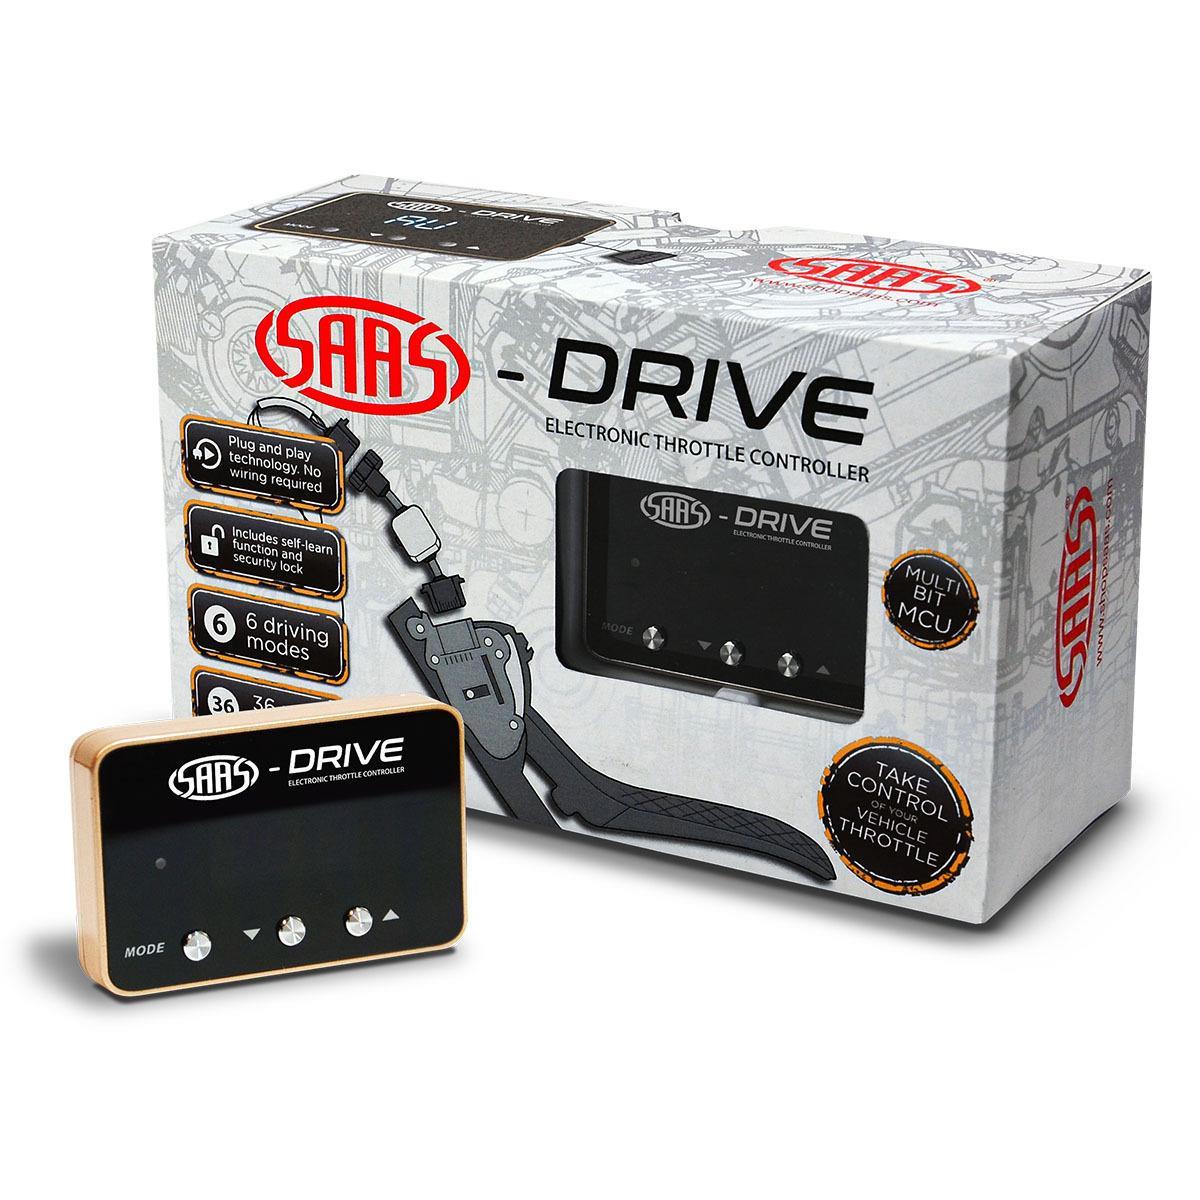 SAAS-Drive Throttle Controller For Audi Q3 2011 >